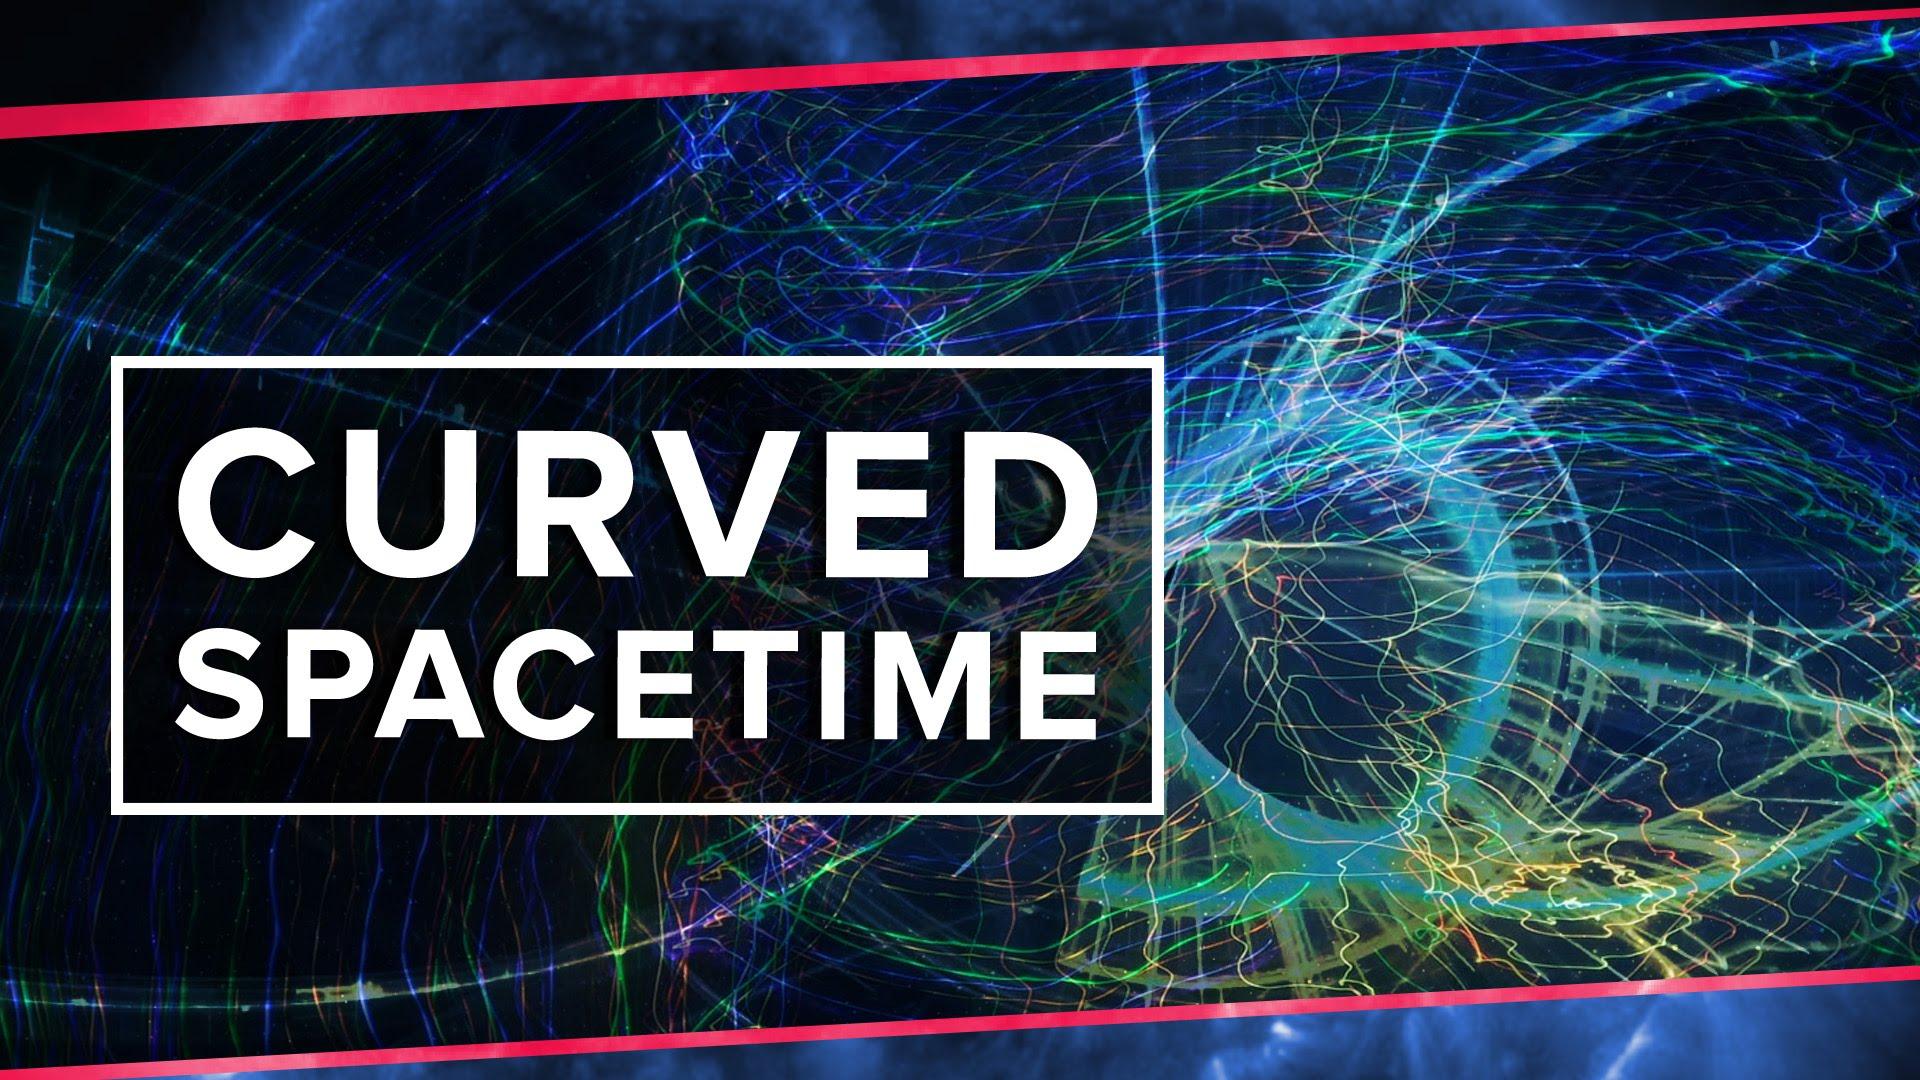 Space times айпи. Curved Spacetime. Пространство и время. PBS Space time. Curved Space-time.